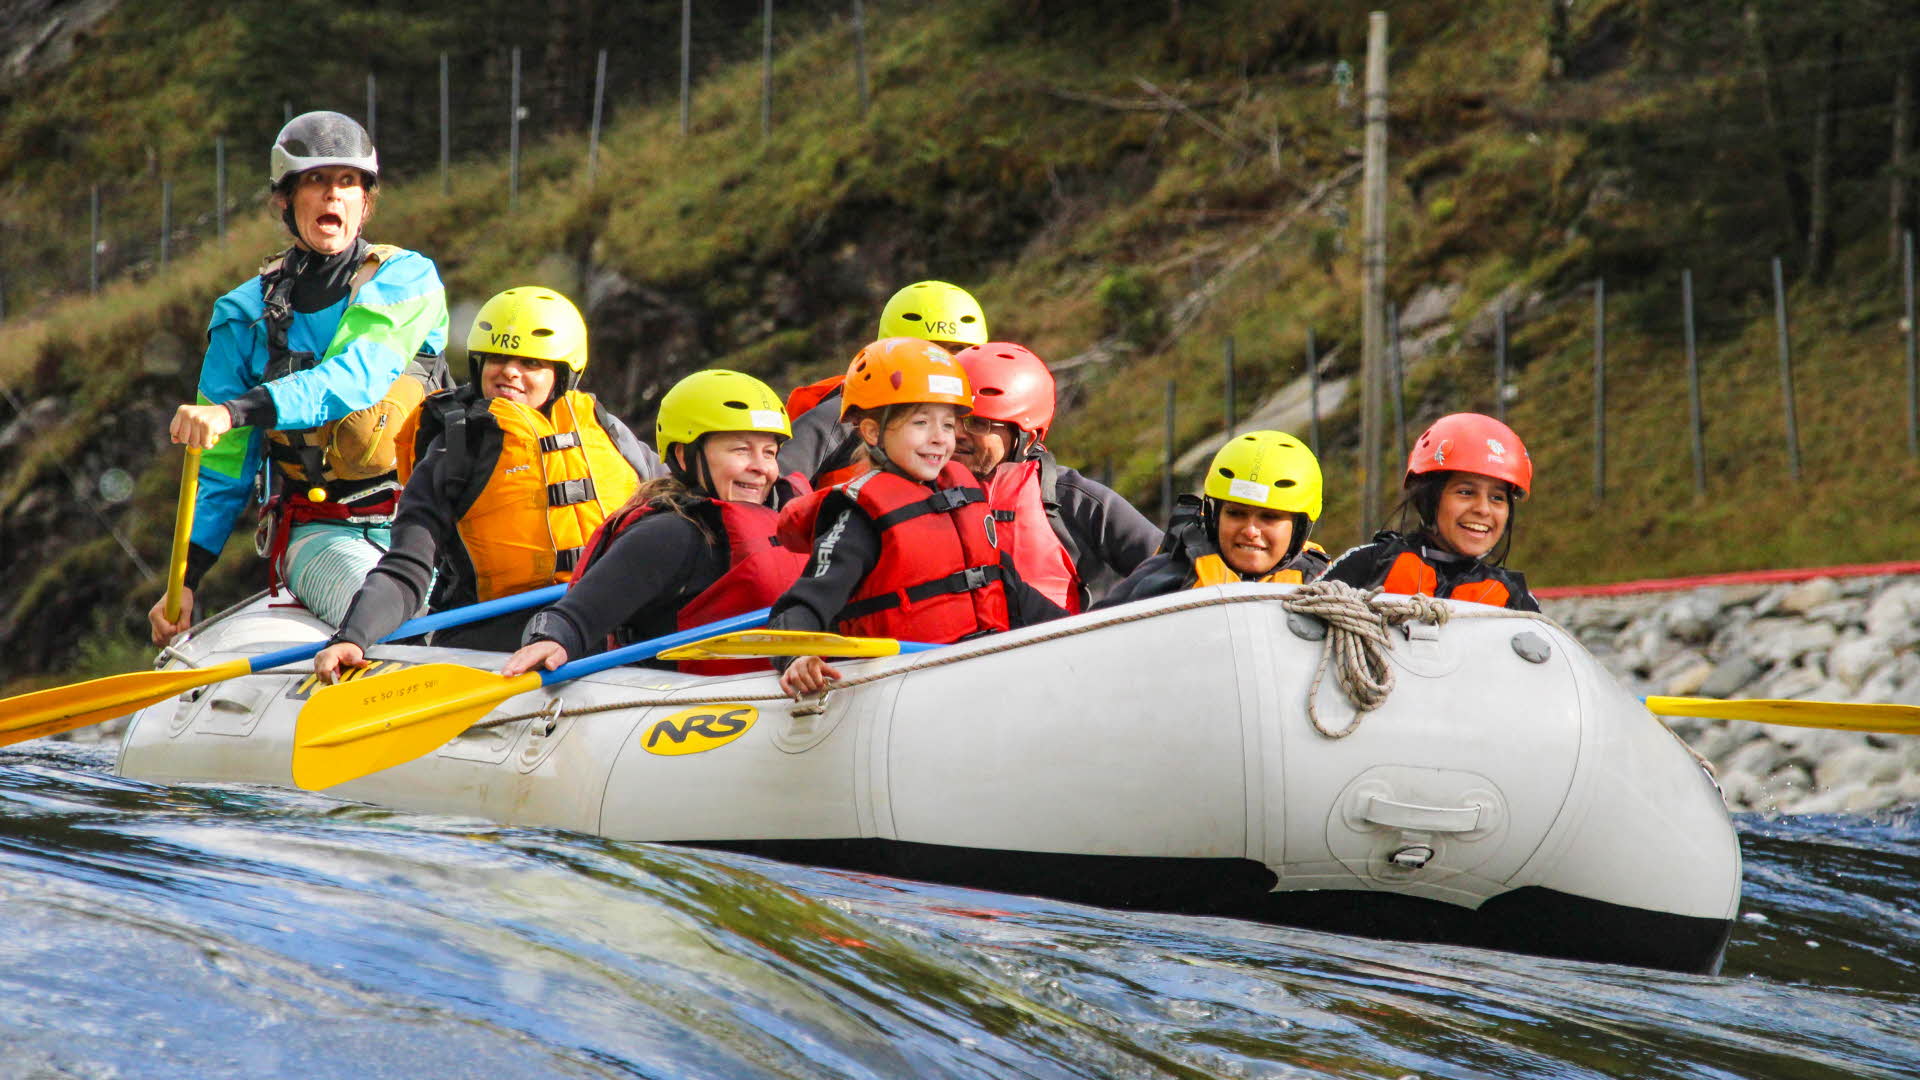 Children in life jackets and helmets sitting in a raft smiling while the guide behind is shouting.